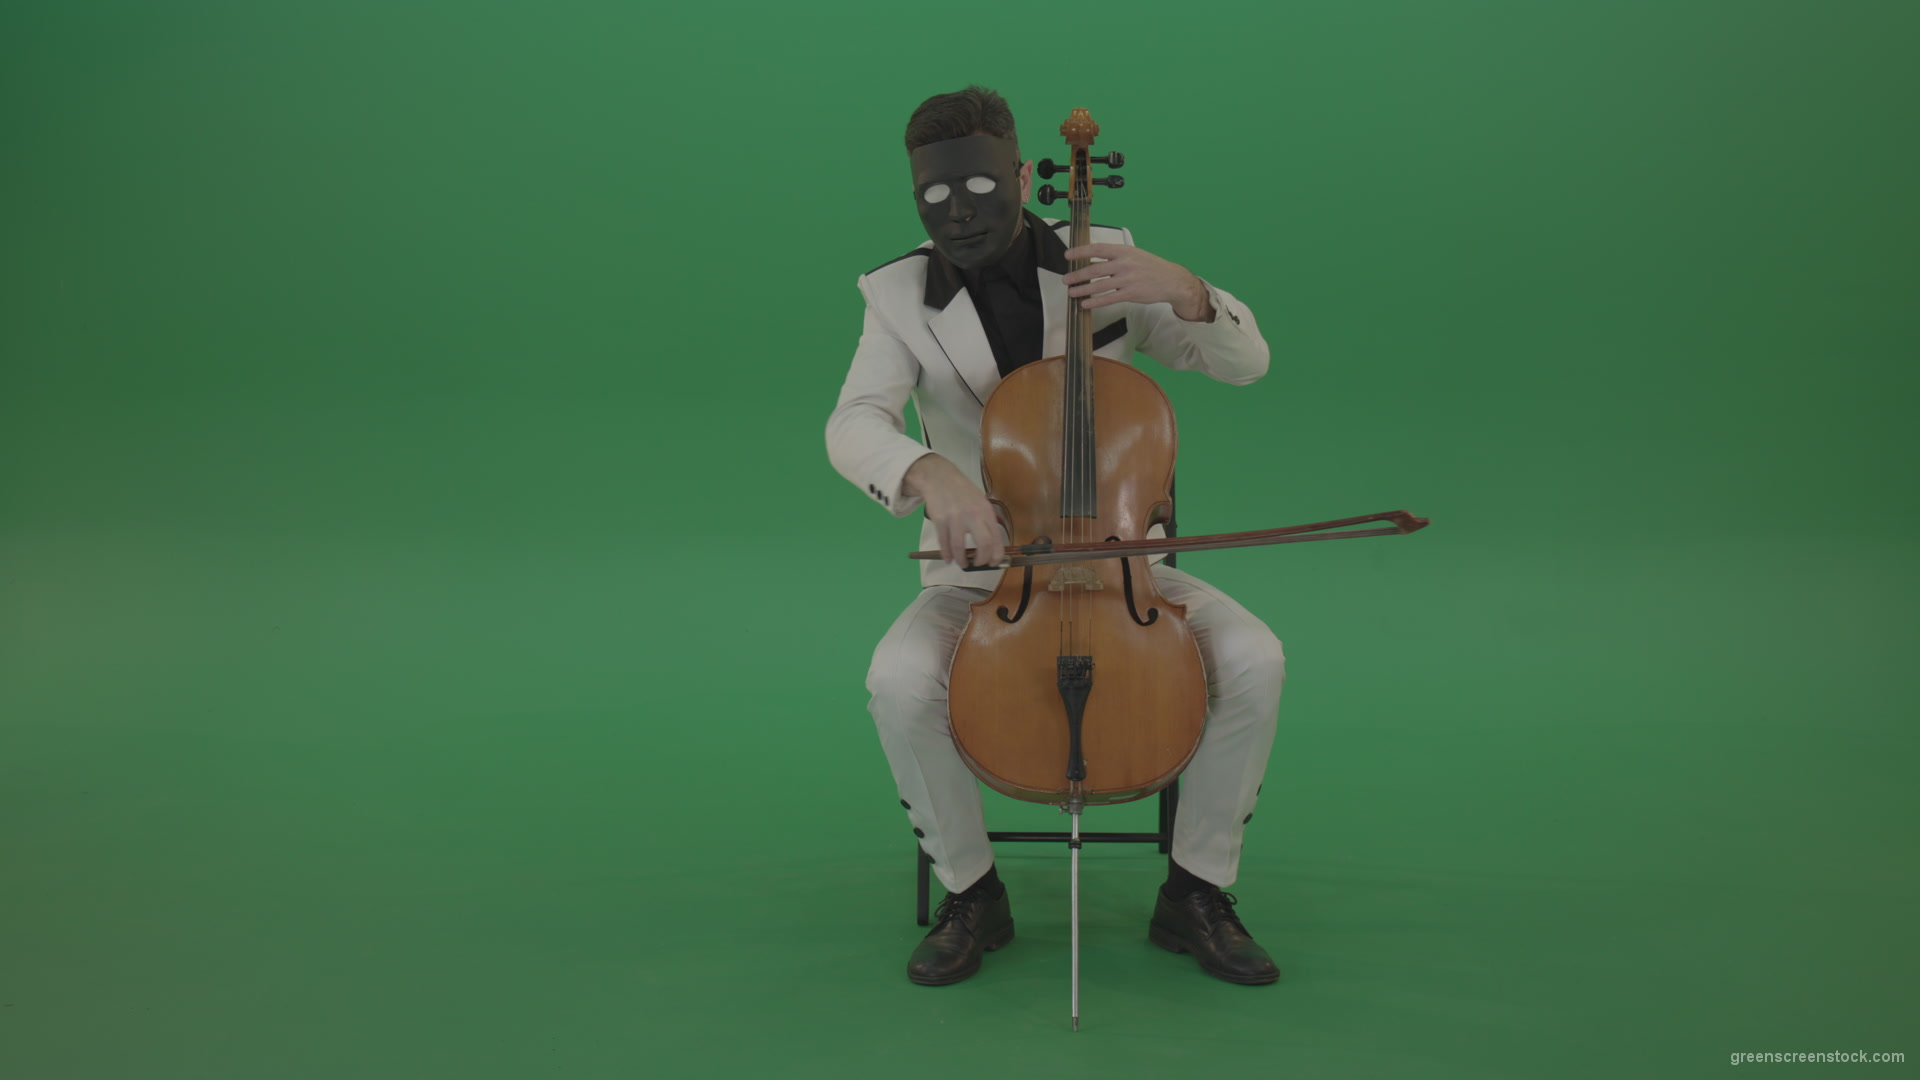 Man-plays-on-a-cello-in-a-white-suit-and-a-black-mask-with-white-eyes_008 Green Screen Stock